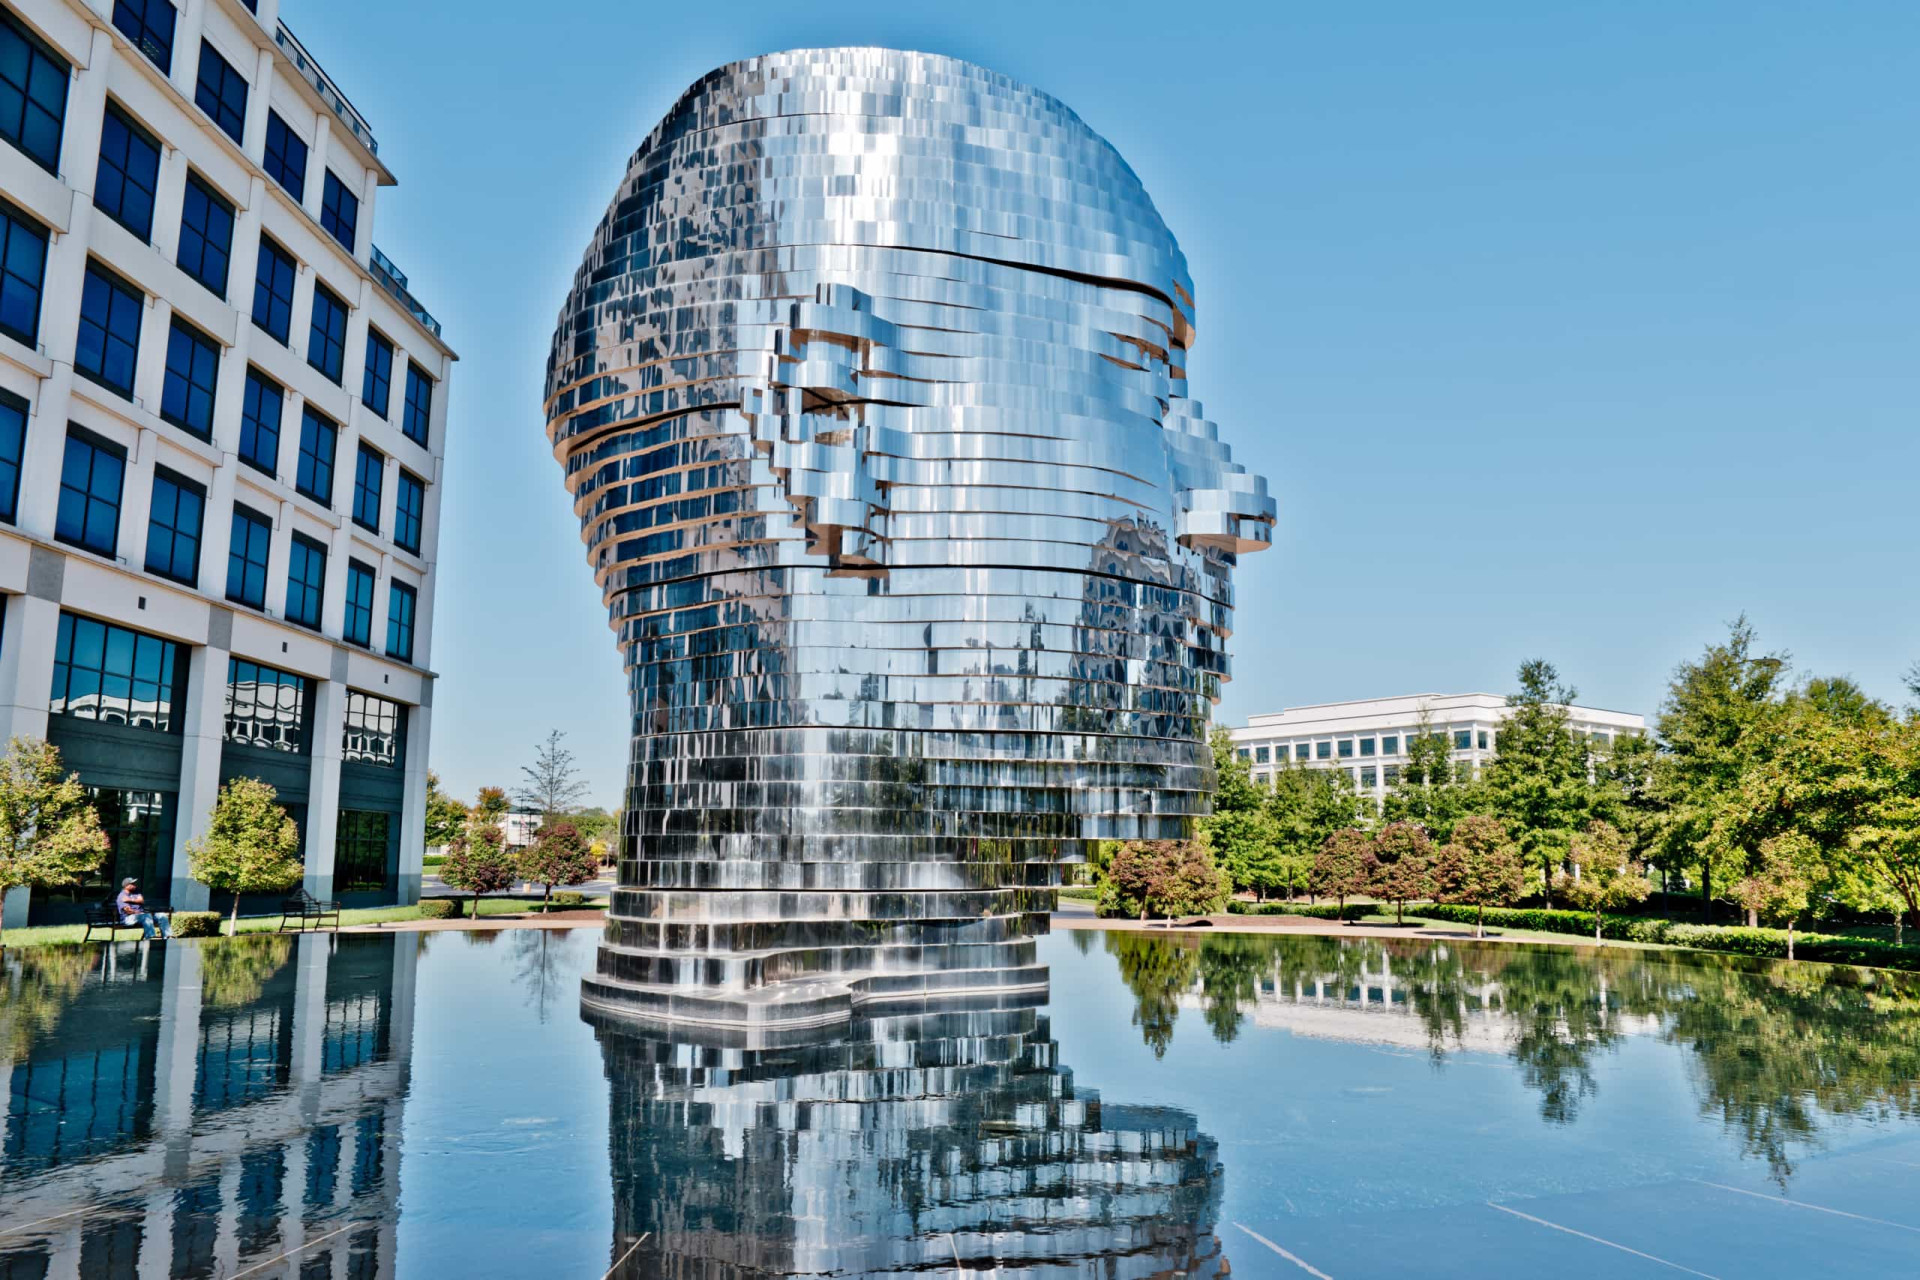 <p>Set in front of the Whitehall Corporate Center, the polished stainless steel METALmorphosis Head by Czech artist David Černý rotates and reconfigures at will, which is ever so slightly disconcerting.</p><p>You may also like:<a href="https://www.starsinsider.com/n/231057?utm_source=msn.com&utm_medium=display&utm_campaign=referral_description&utm_content=198095v22en-en"> The thrilling rollercoaster of Kanye West's life and career</a></p>